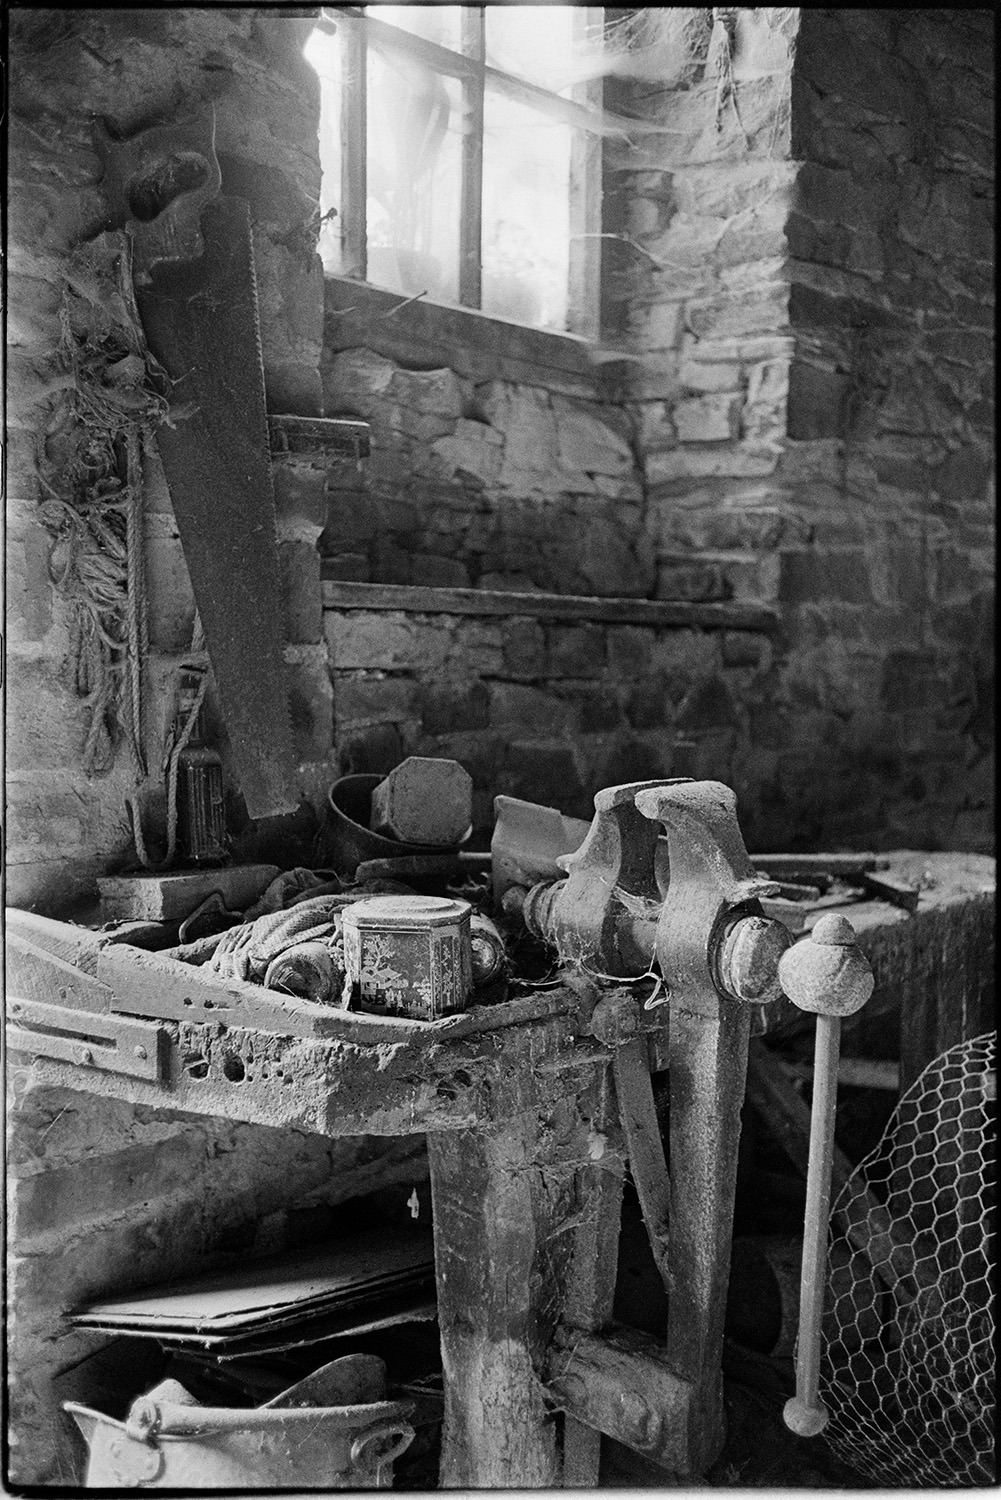 Workbench and vice in old wheelwright's shop. 
[A vice attached to a workbench with various tools in a former wheelwright's workshop by the churchyard path in Beaford. A saw is hung up on the wall behind the workbench.]